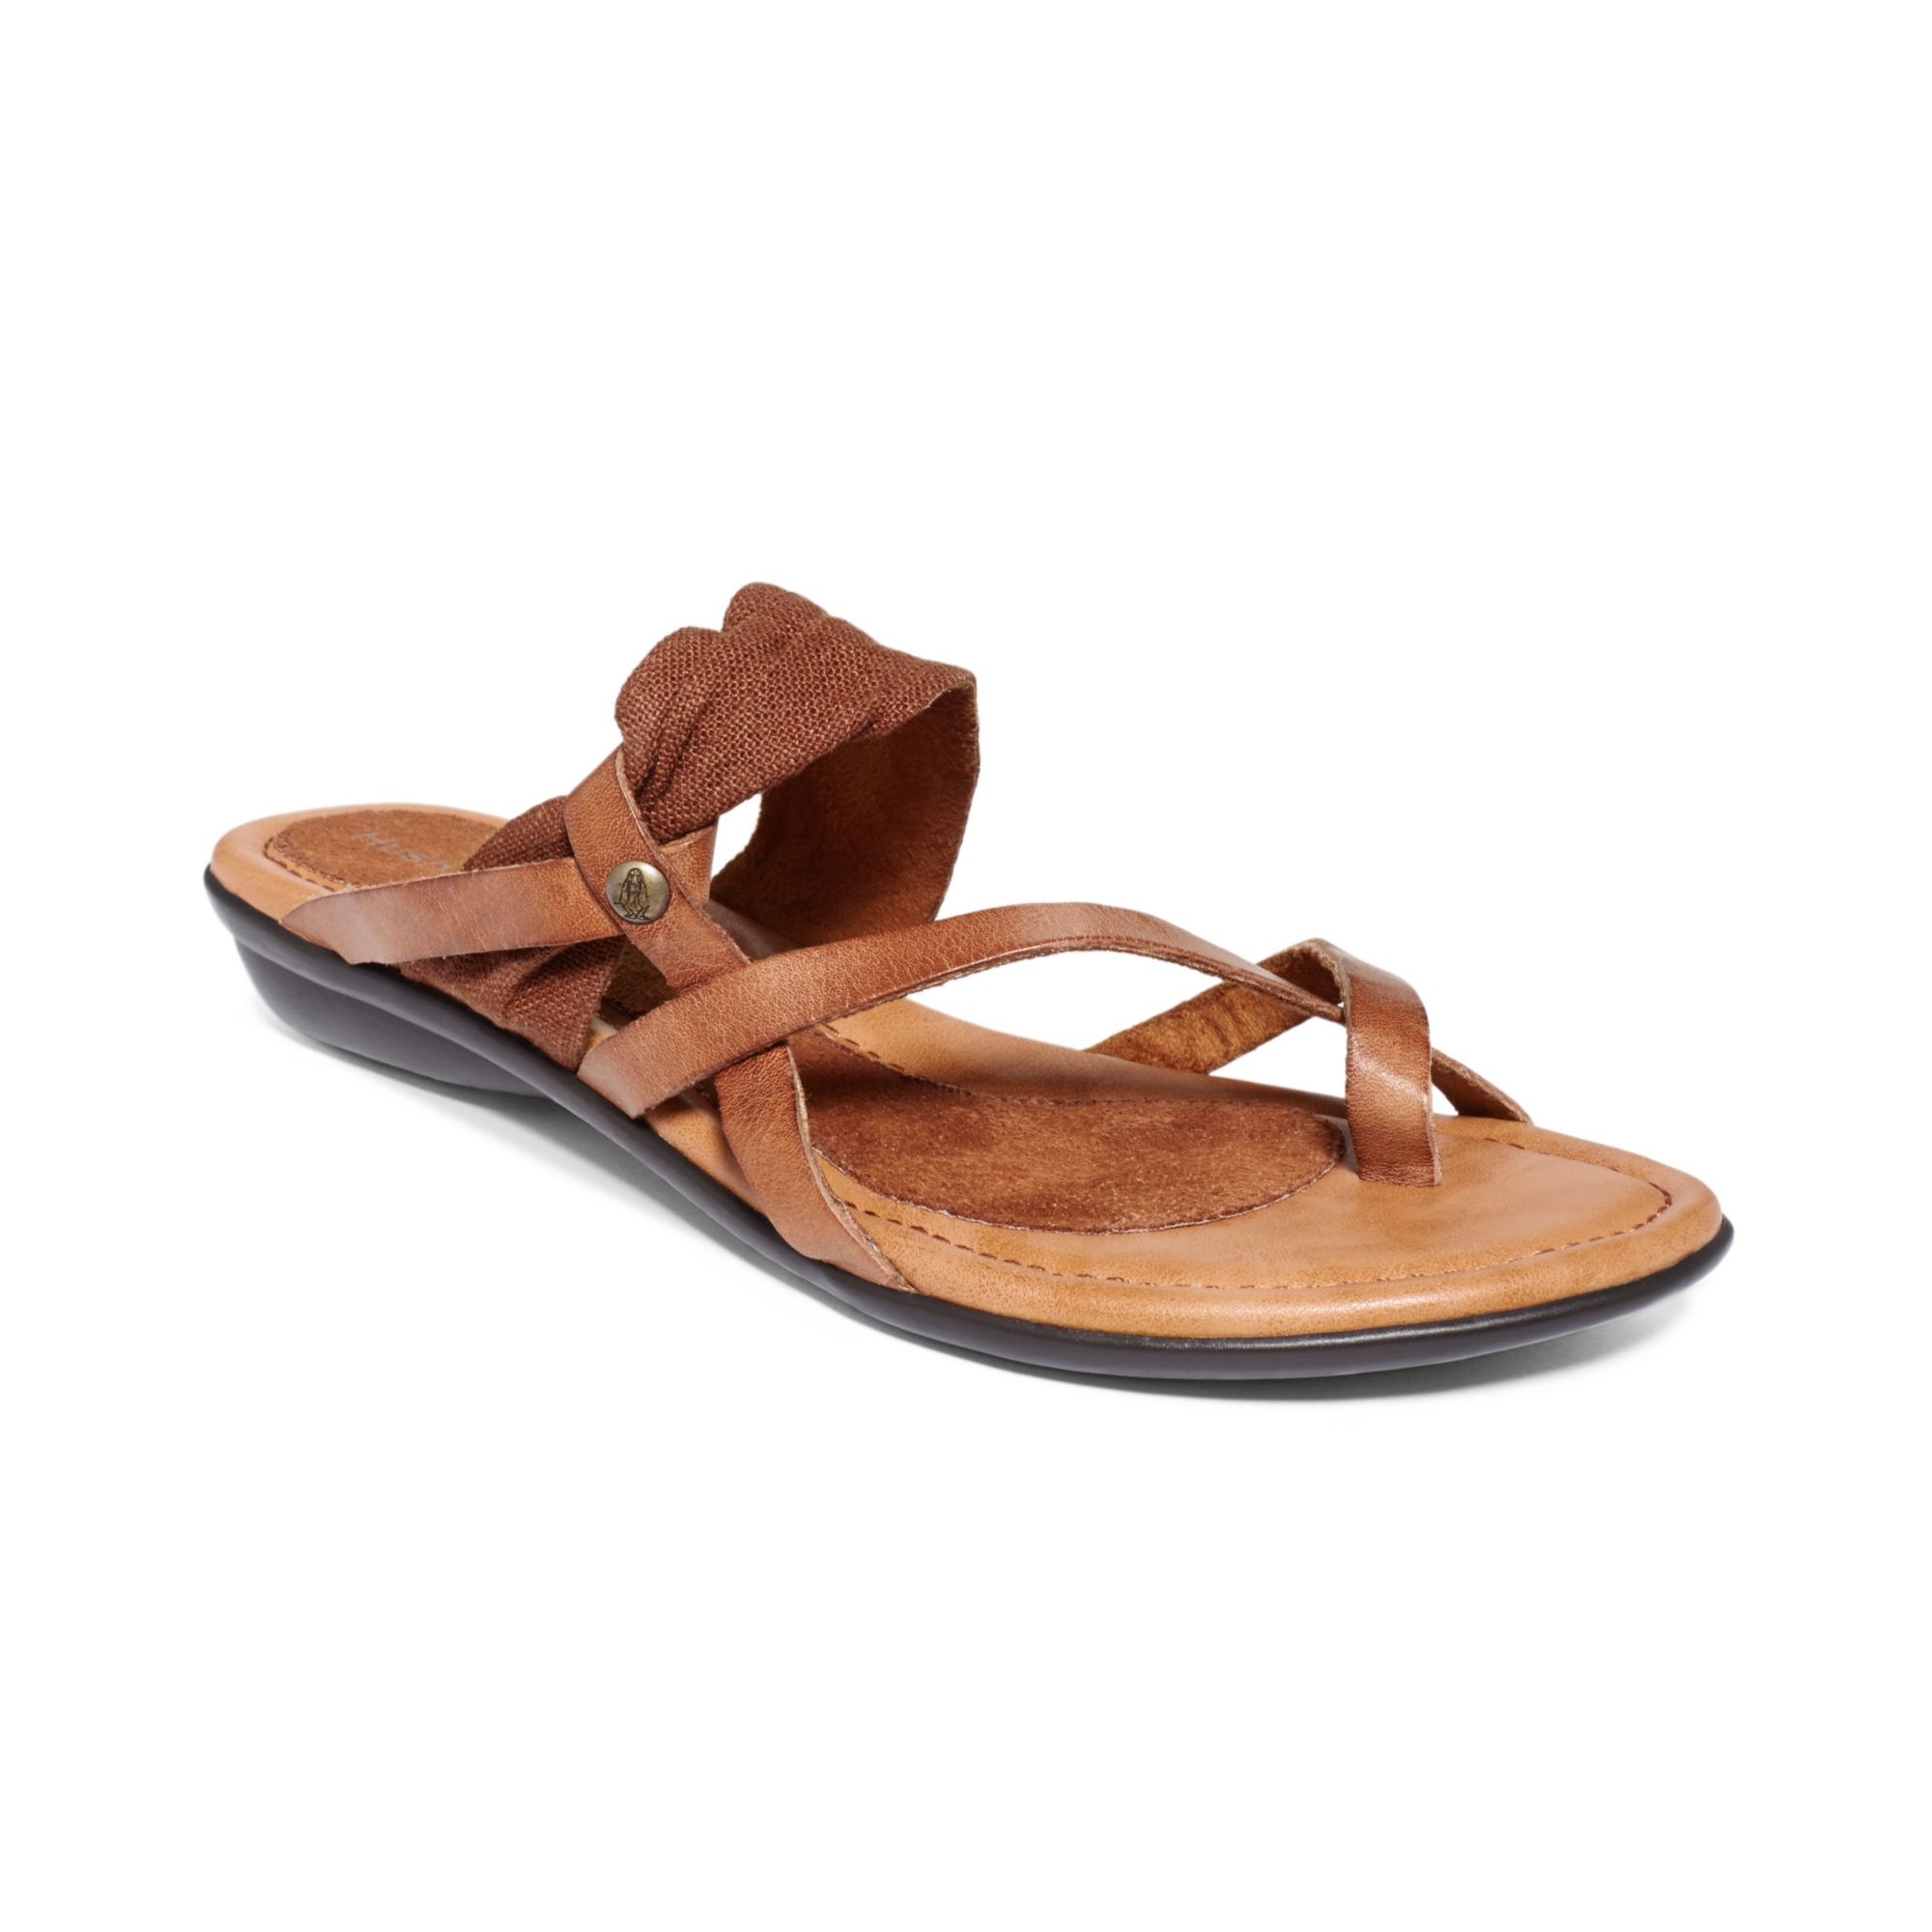 Lyst - Hush Puppies Womens Nishi Sandals in Brown